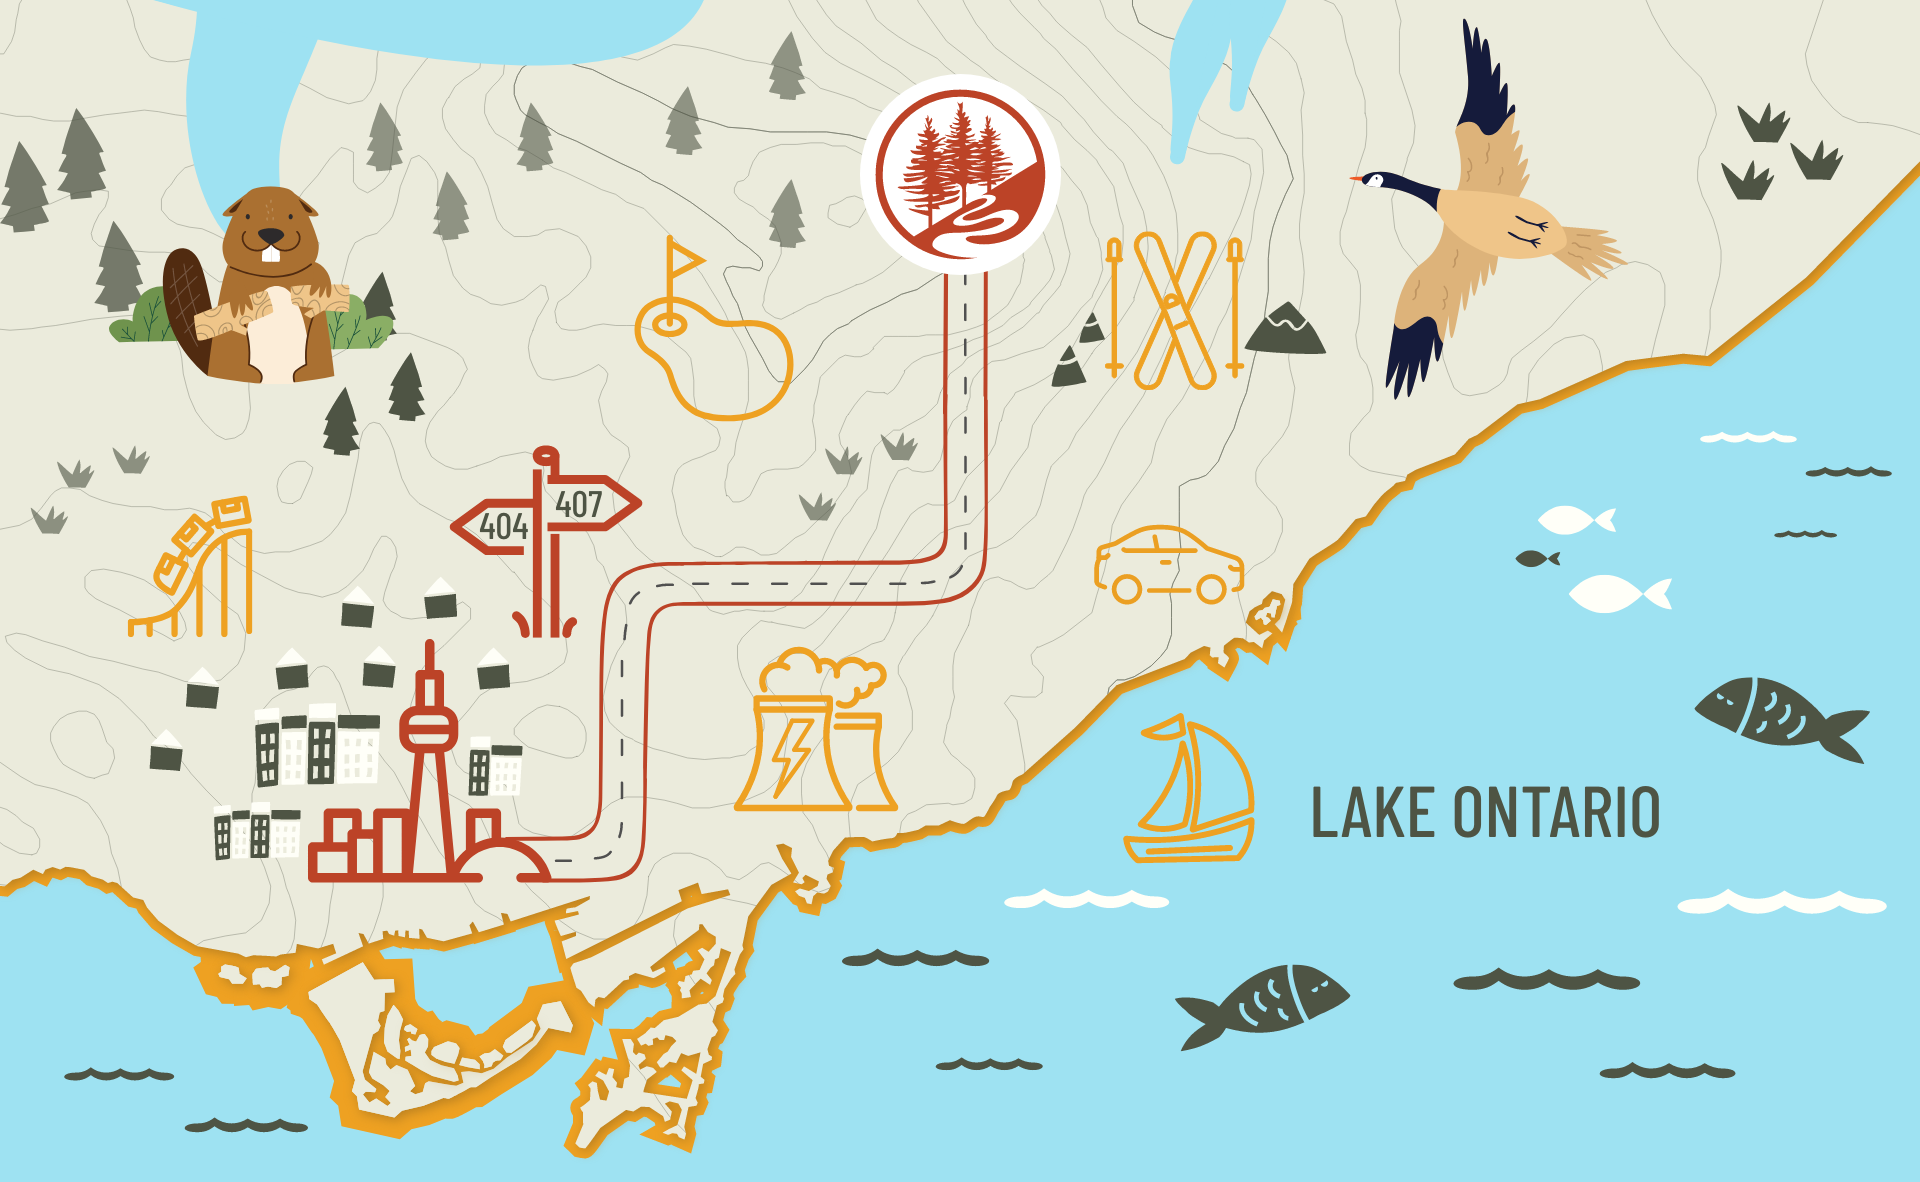 Illustrative Map of the GTA showing directions from Toronto to Trail Hub